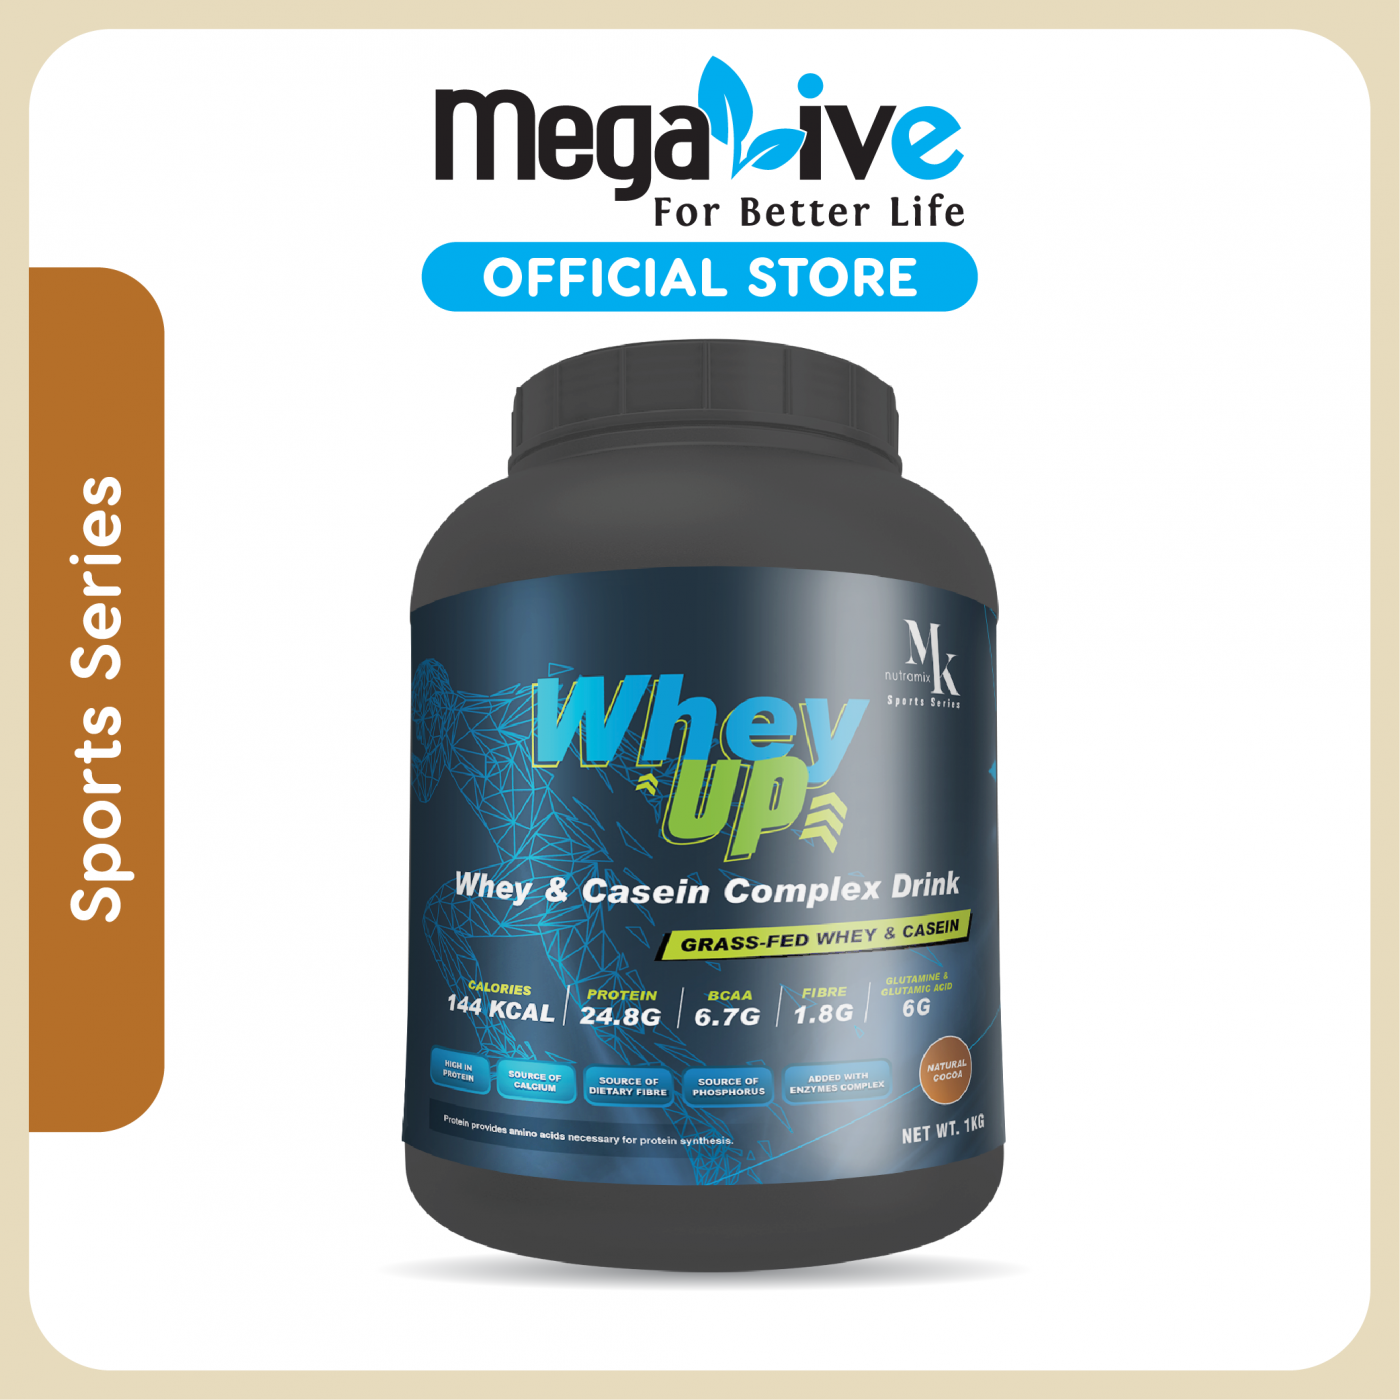 MK nutramix Sports Series Whey Up